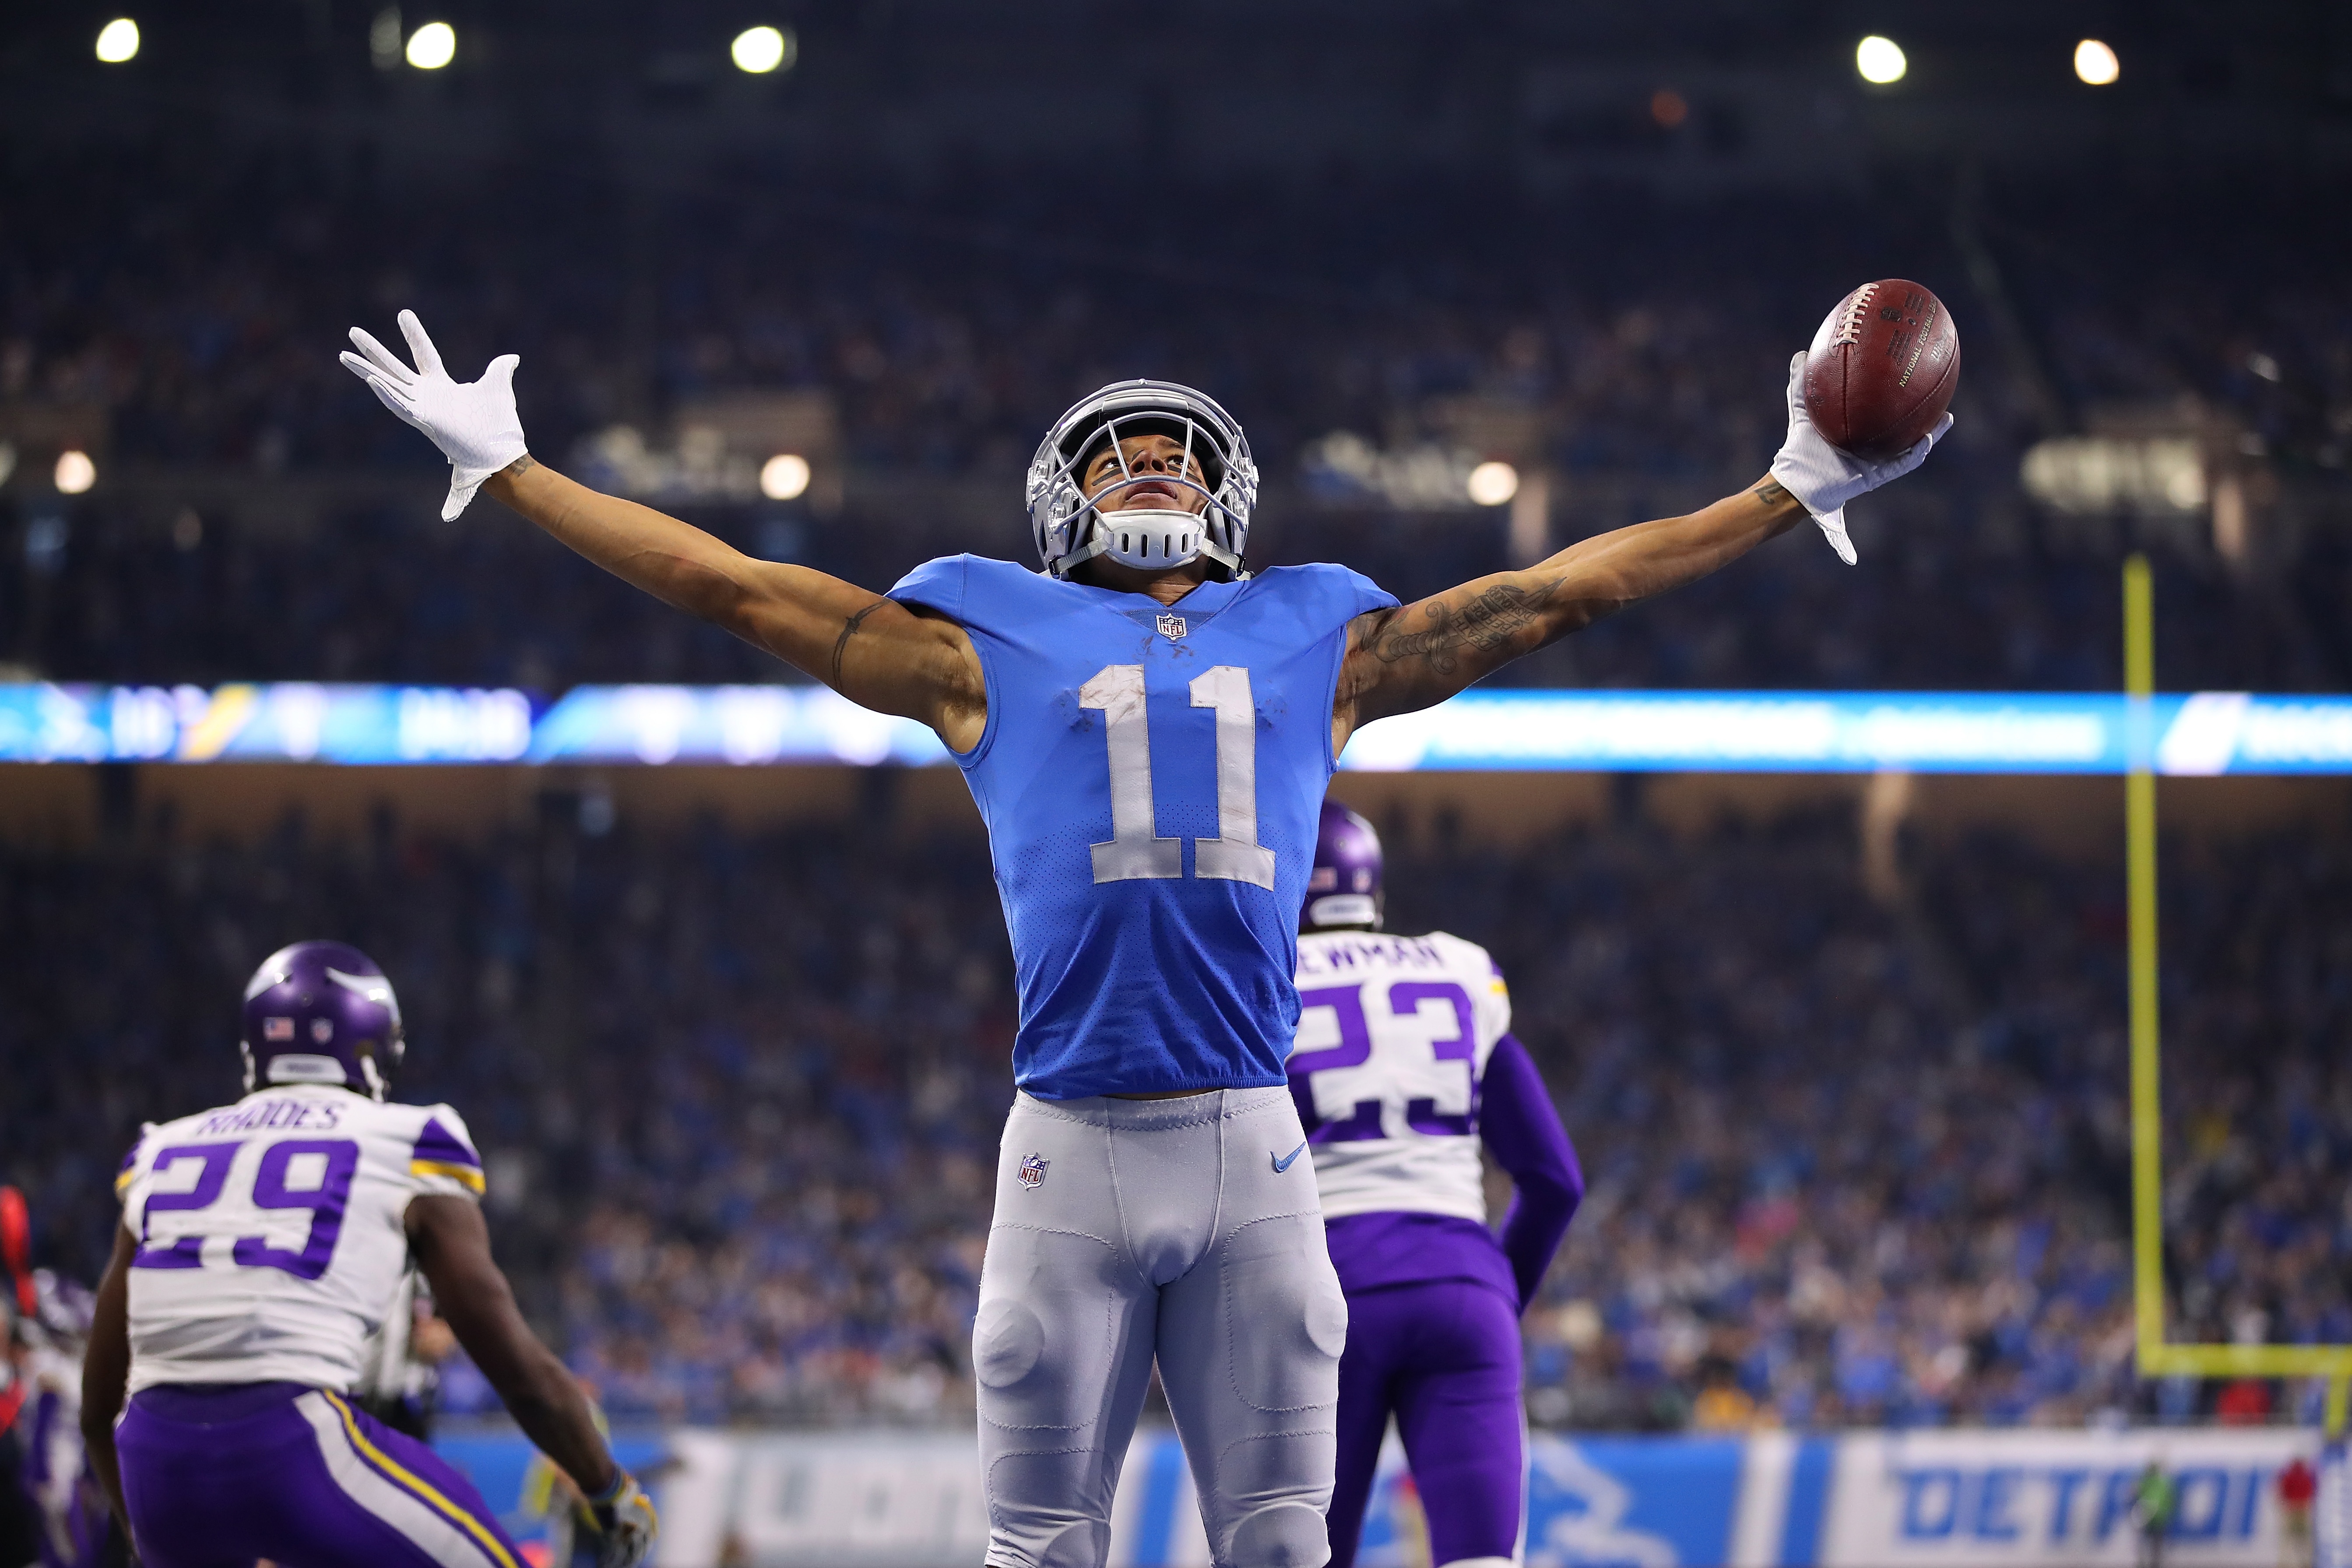 Could the Detroit Lions lose their Thanksgiving Day game?